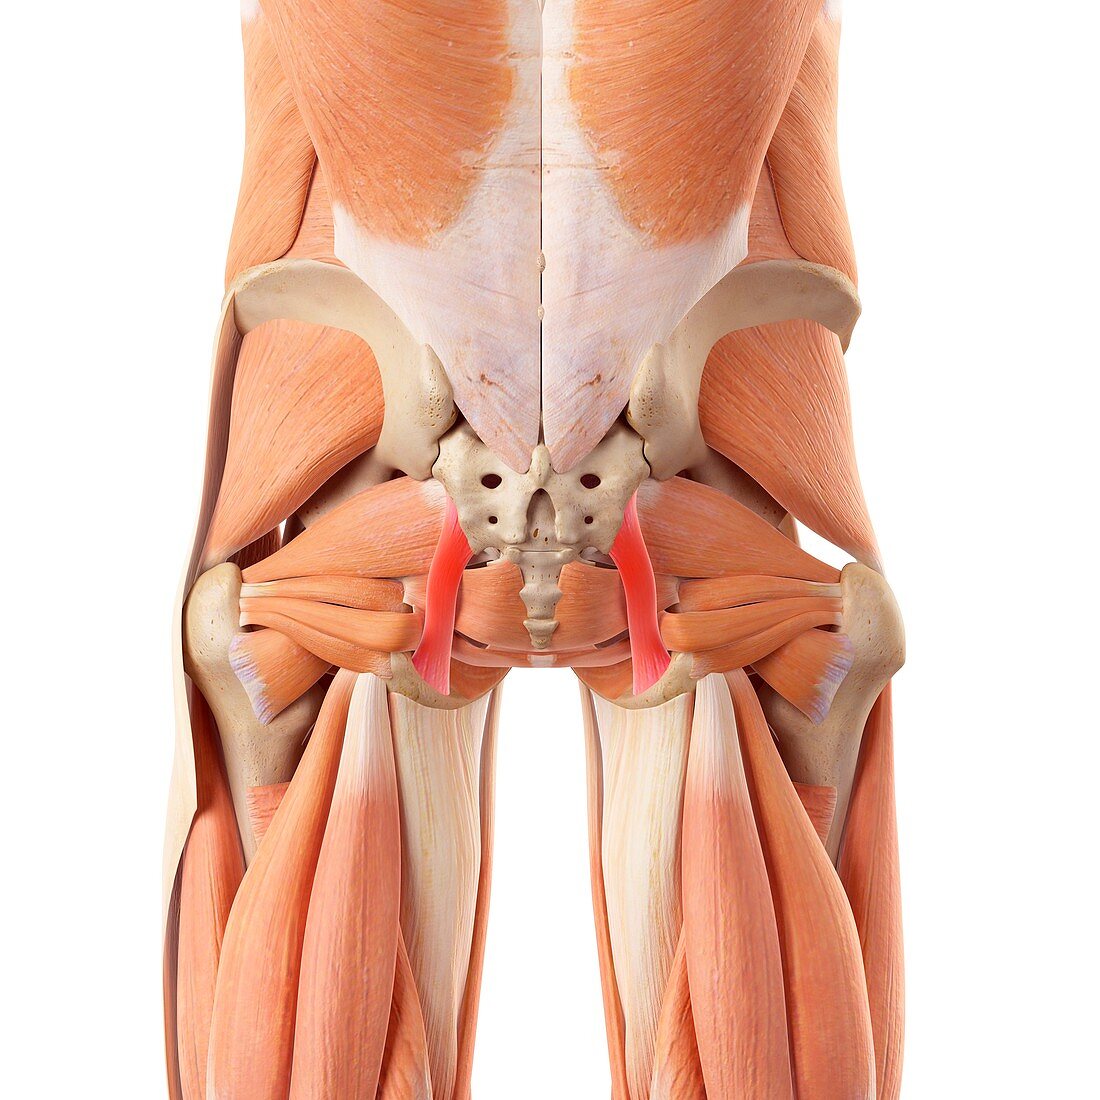 Human buttock ligaments